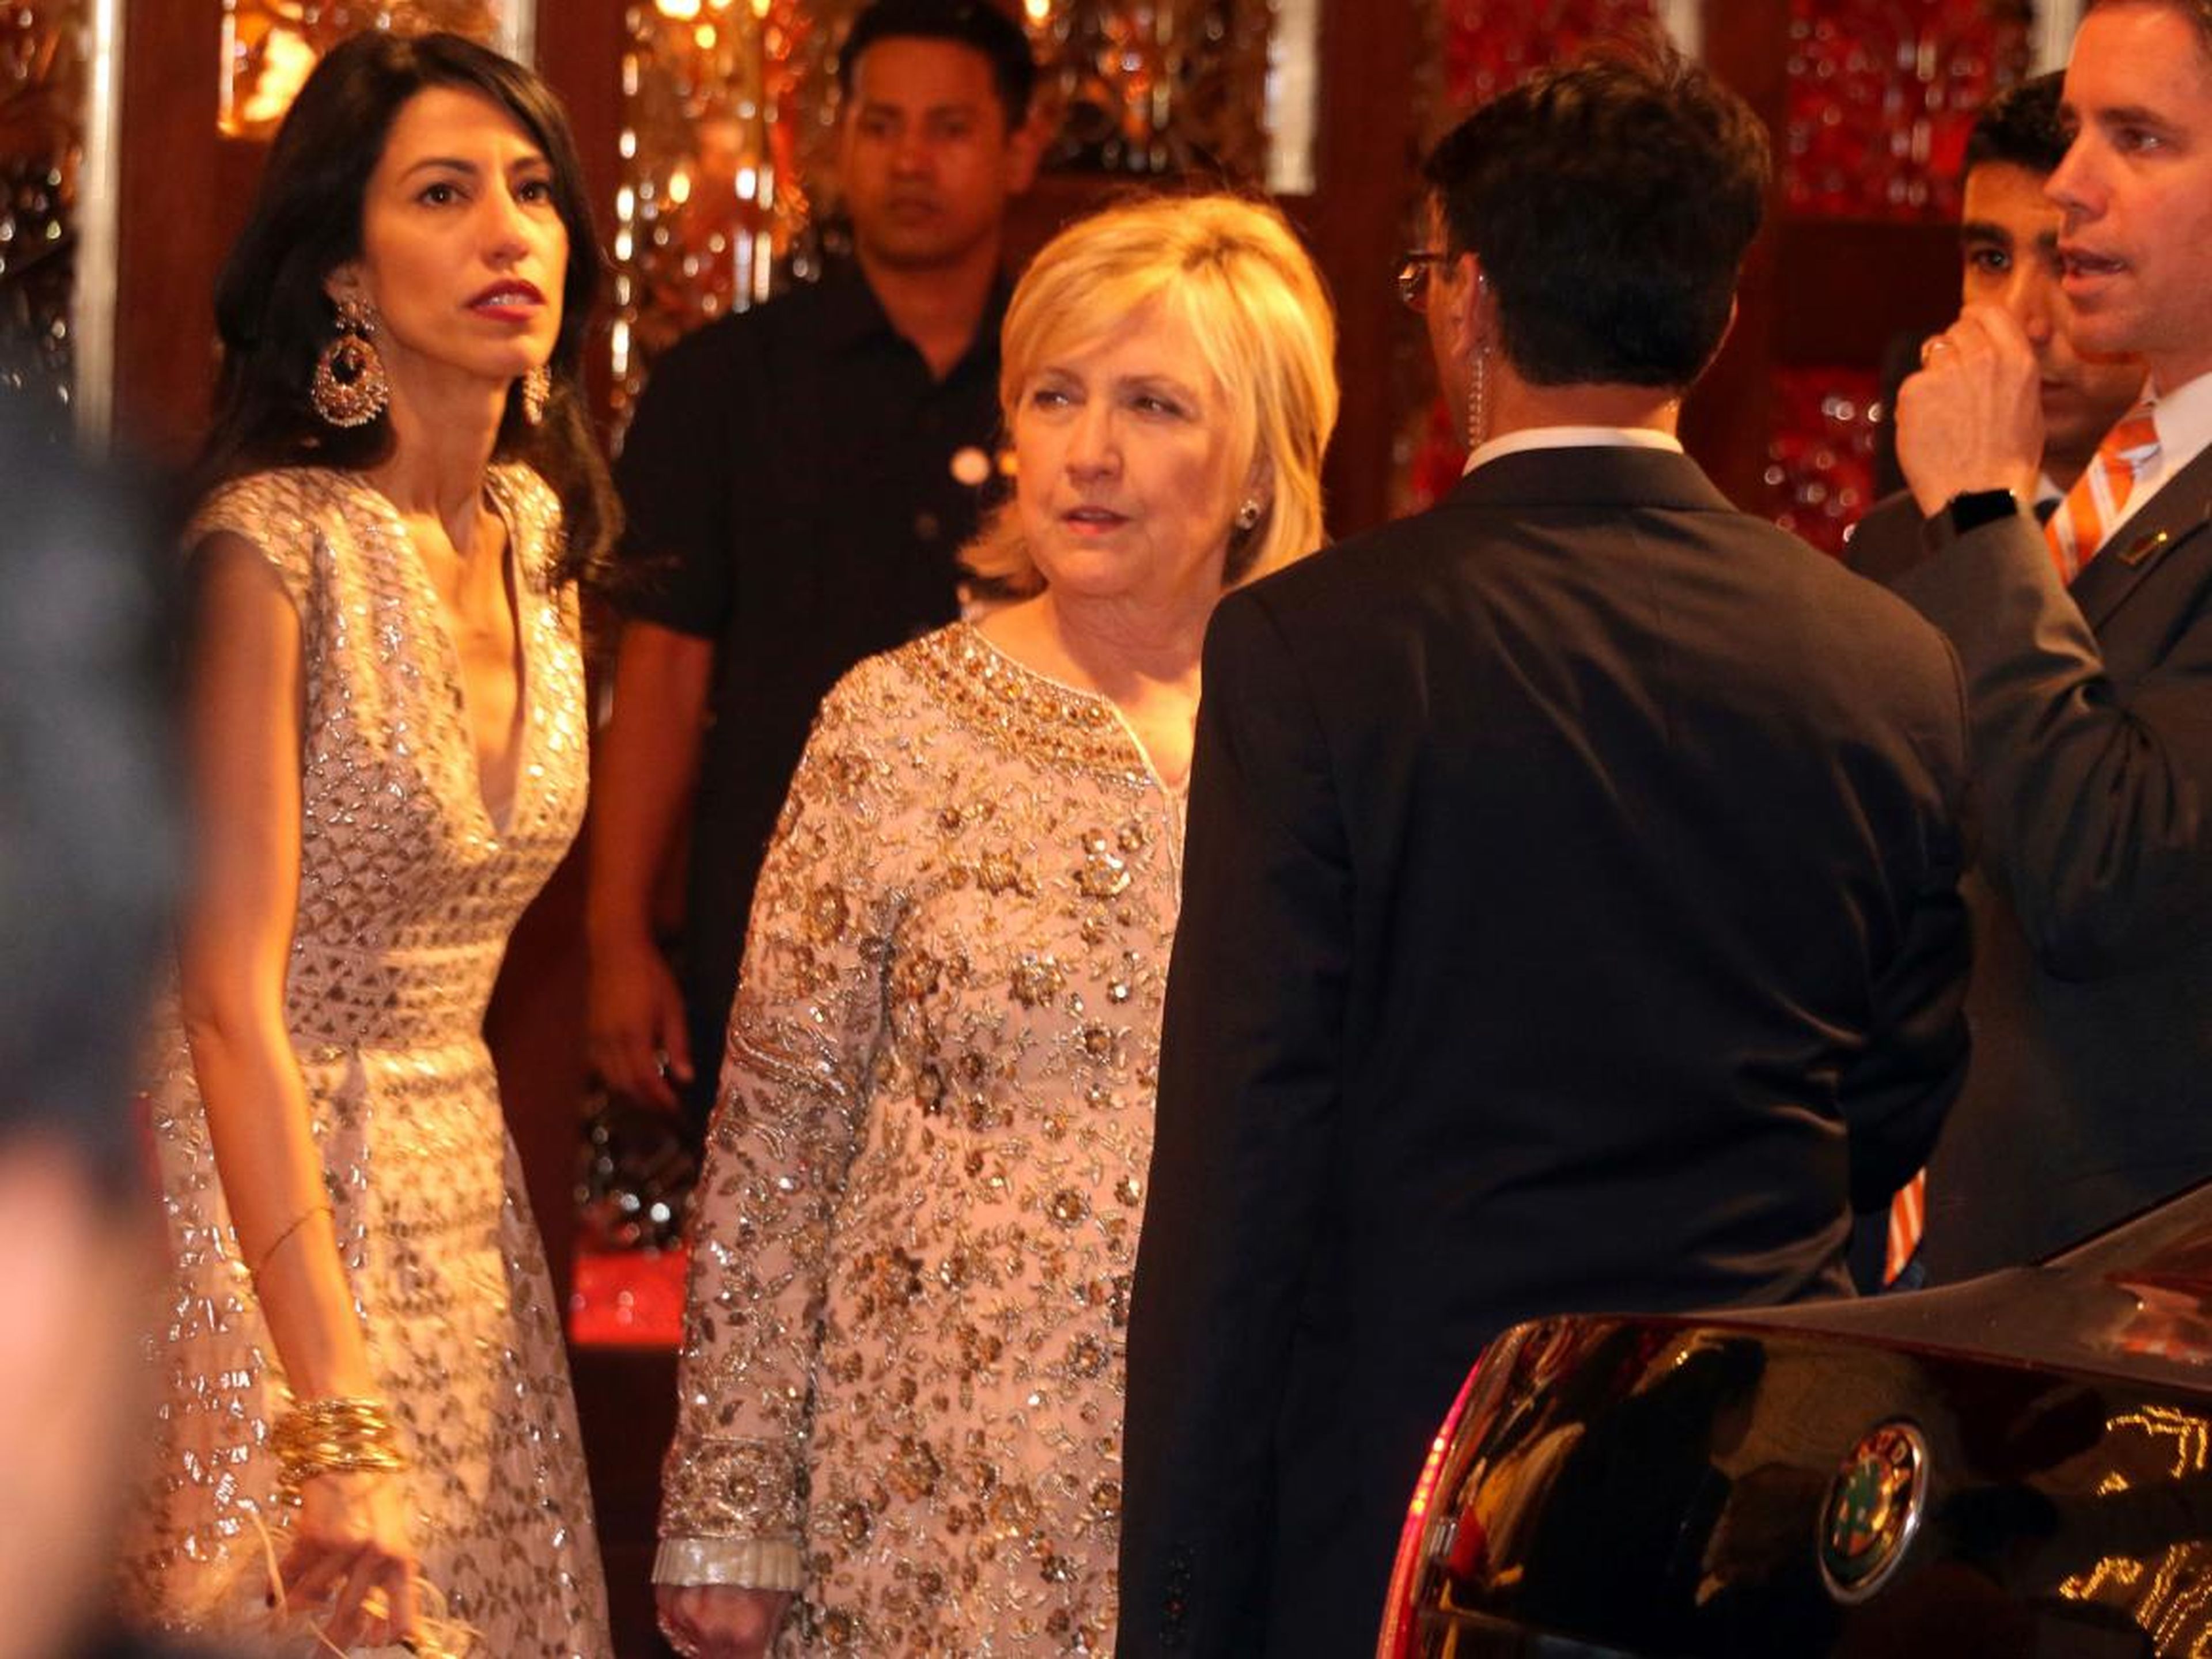 ... including former Secretary of State and presidential candidate Hillary Clinton with her longtime aide, Huma Abedin ...